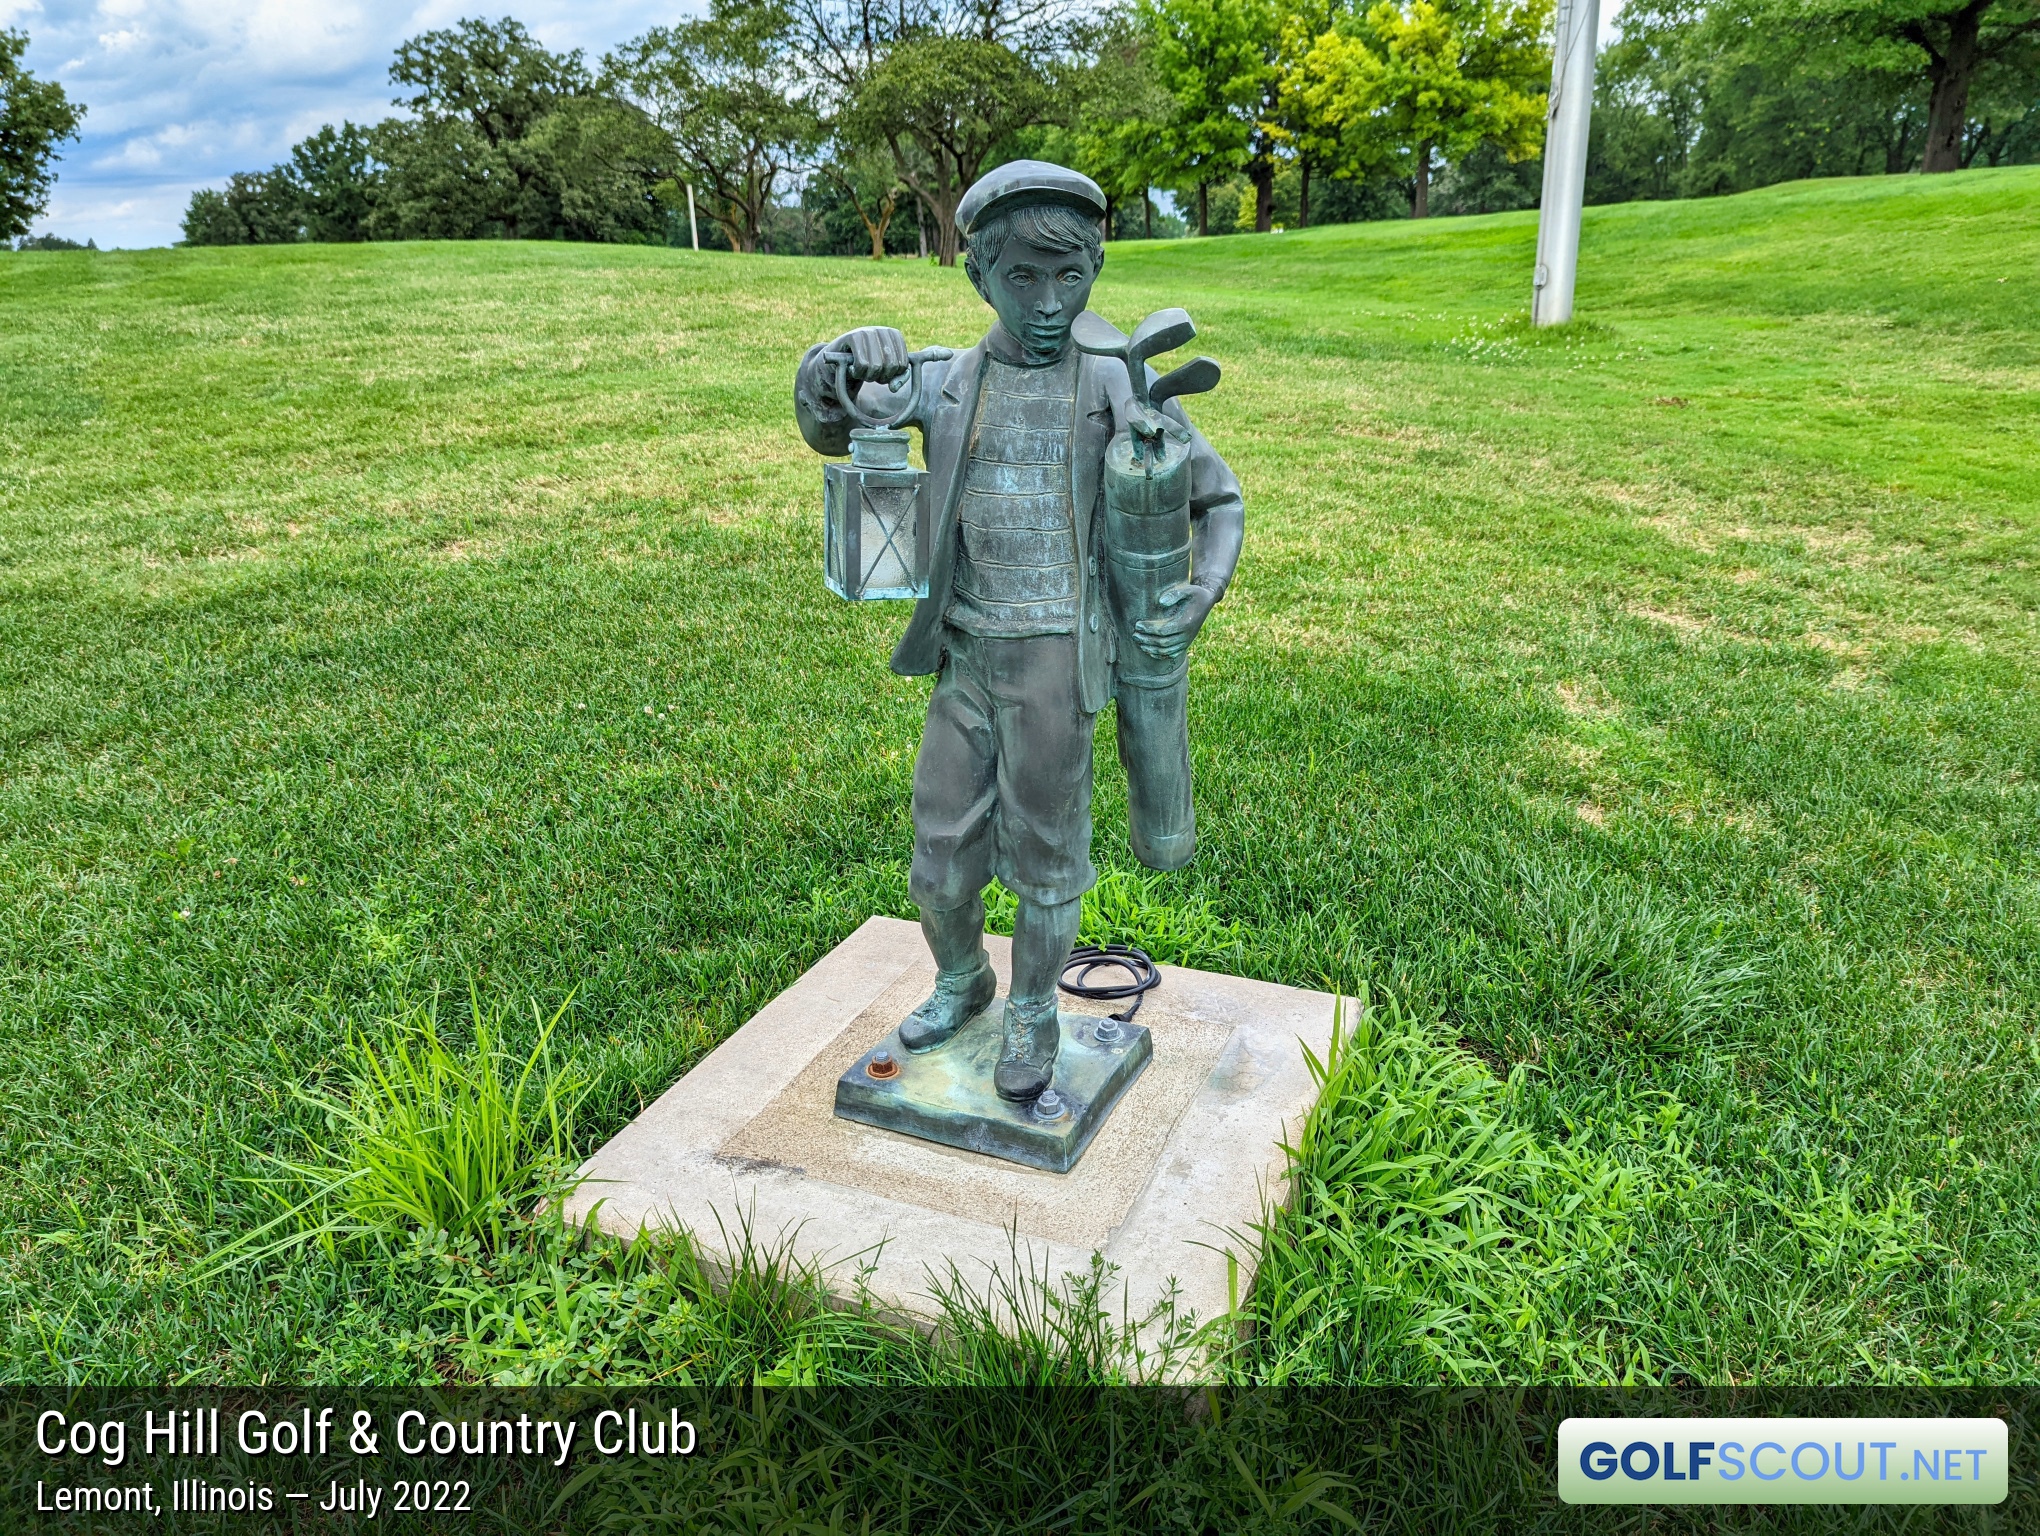 Miscellaneous photo of Cog Hill Course #4 - Dubsdread in Palos Park, Illinois. Who was this fella? I'd love to know.